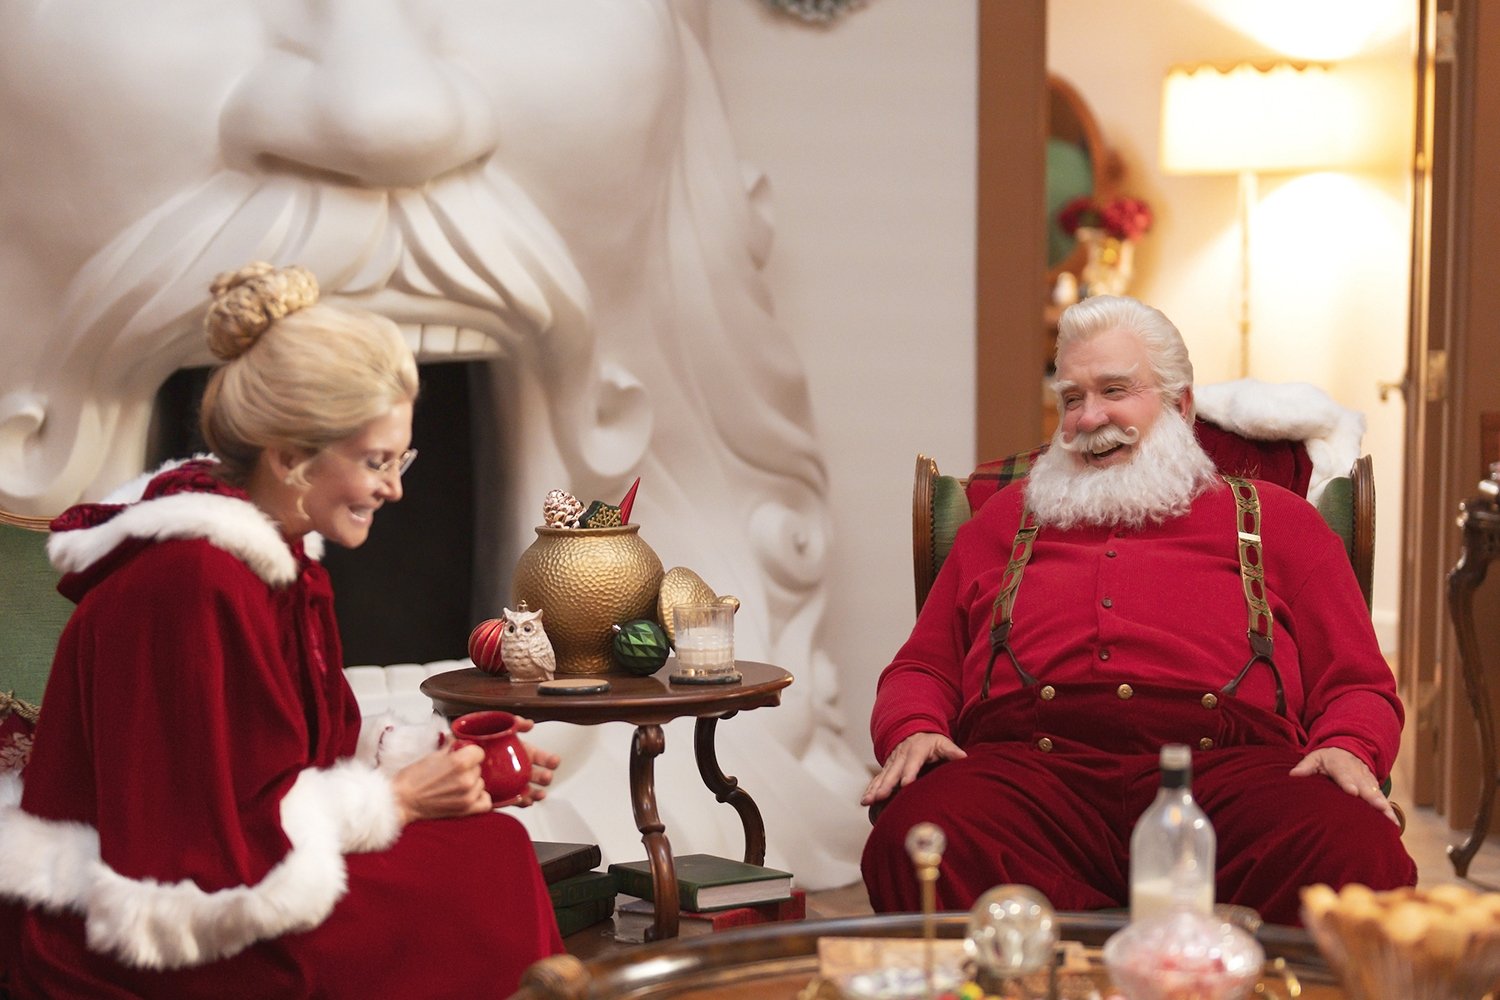 Elizabeth Mitchell as Mrs. Claus and Tim Allen as Santa Claus in The Santa Clauses, available to watch on Disney+ as a coninuation of The Santa Clause movies.